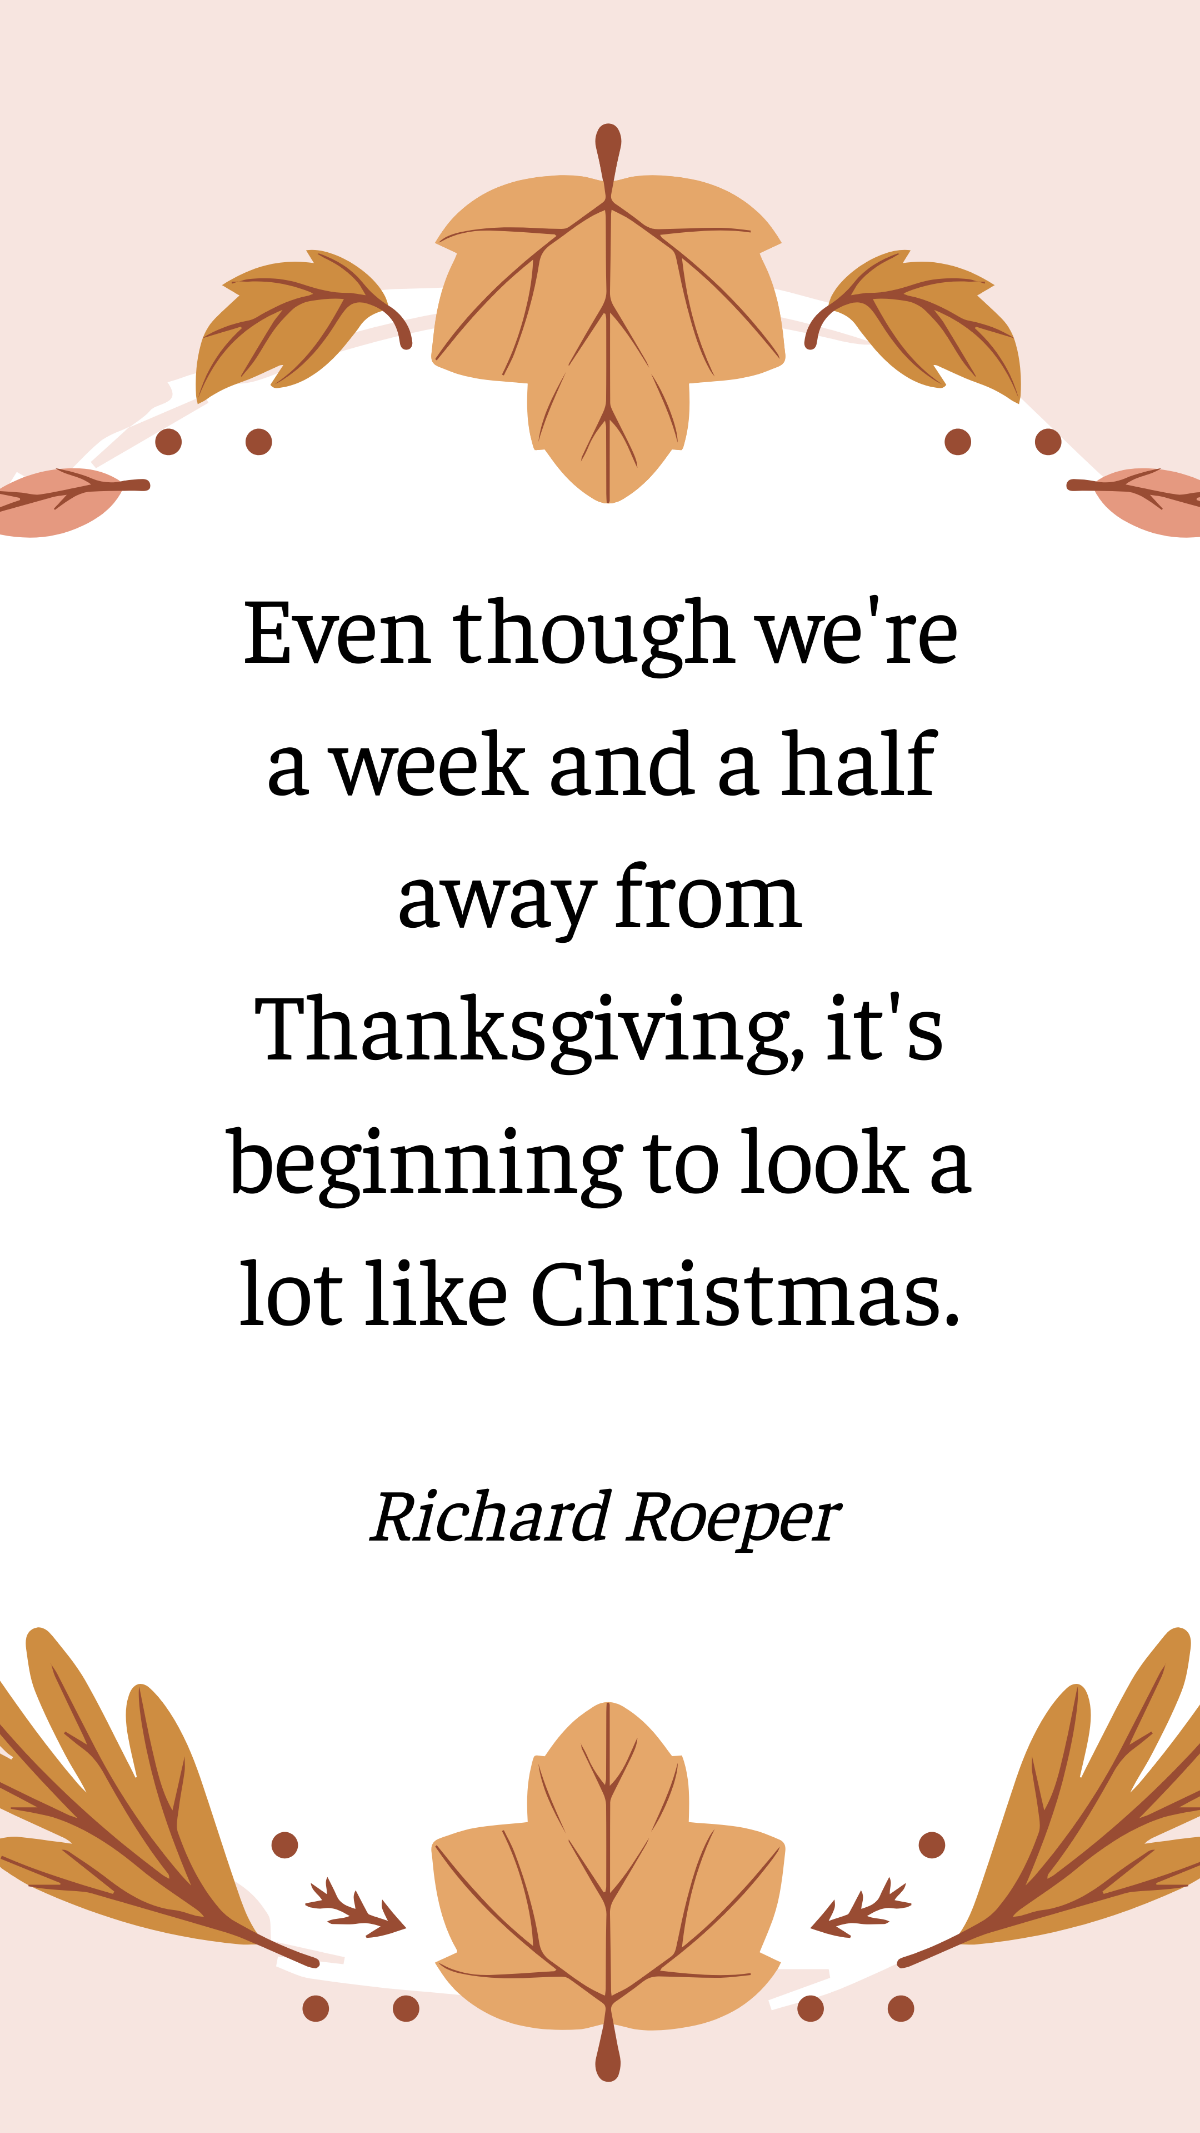 Richard Roeper - Even though we're a week and a half away from Thanksgiving, it's beginning to look a lot like Christmas. Template